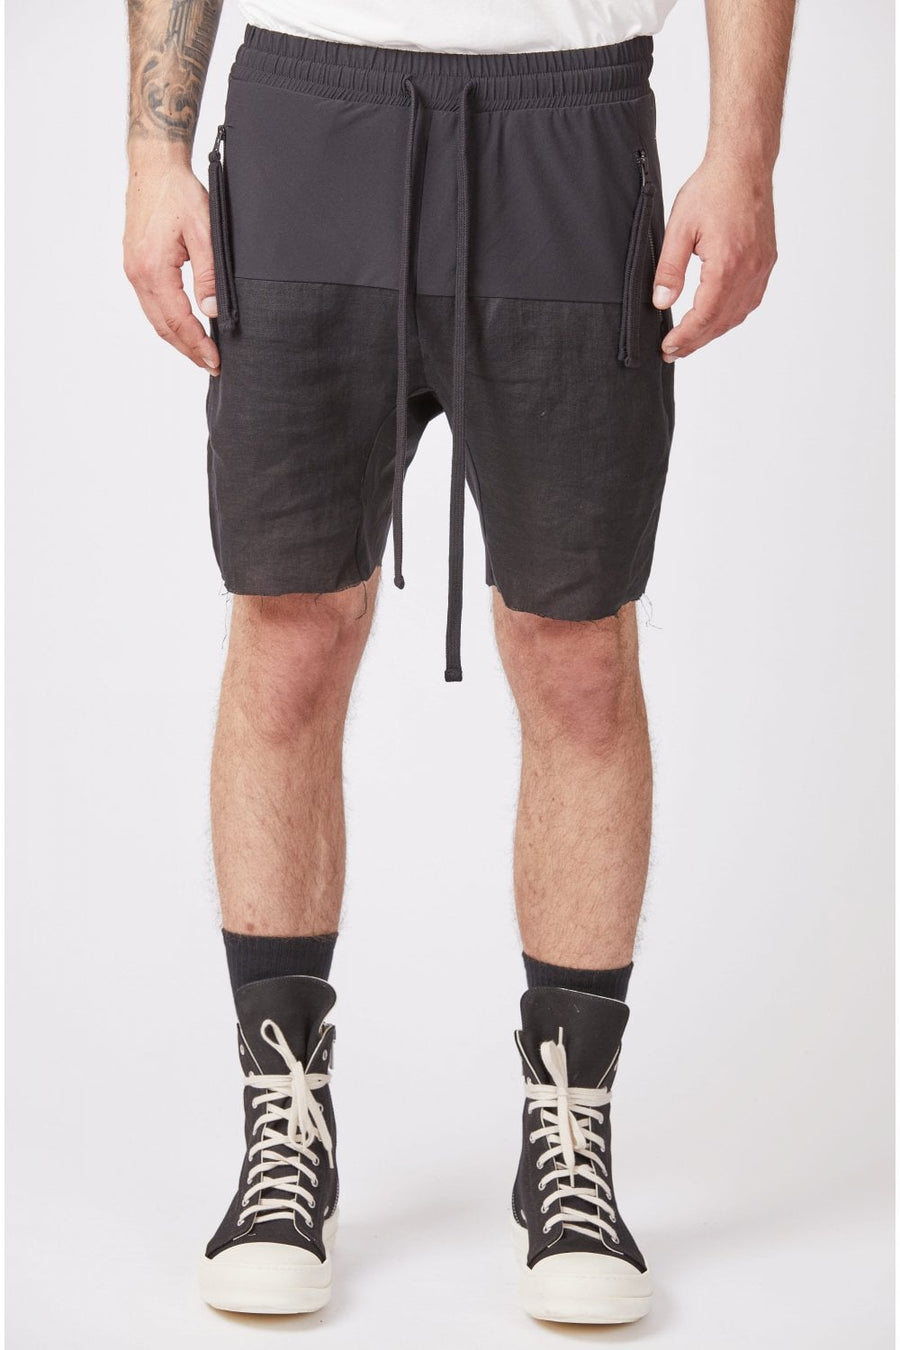 Buy the Thom Krom M ST 311 Shorts in Black at Intro. Spend £50 for free UK delivery. Official stockists. We ship worldwide.